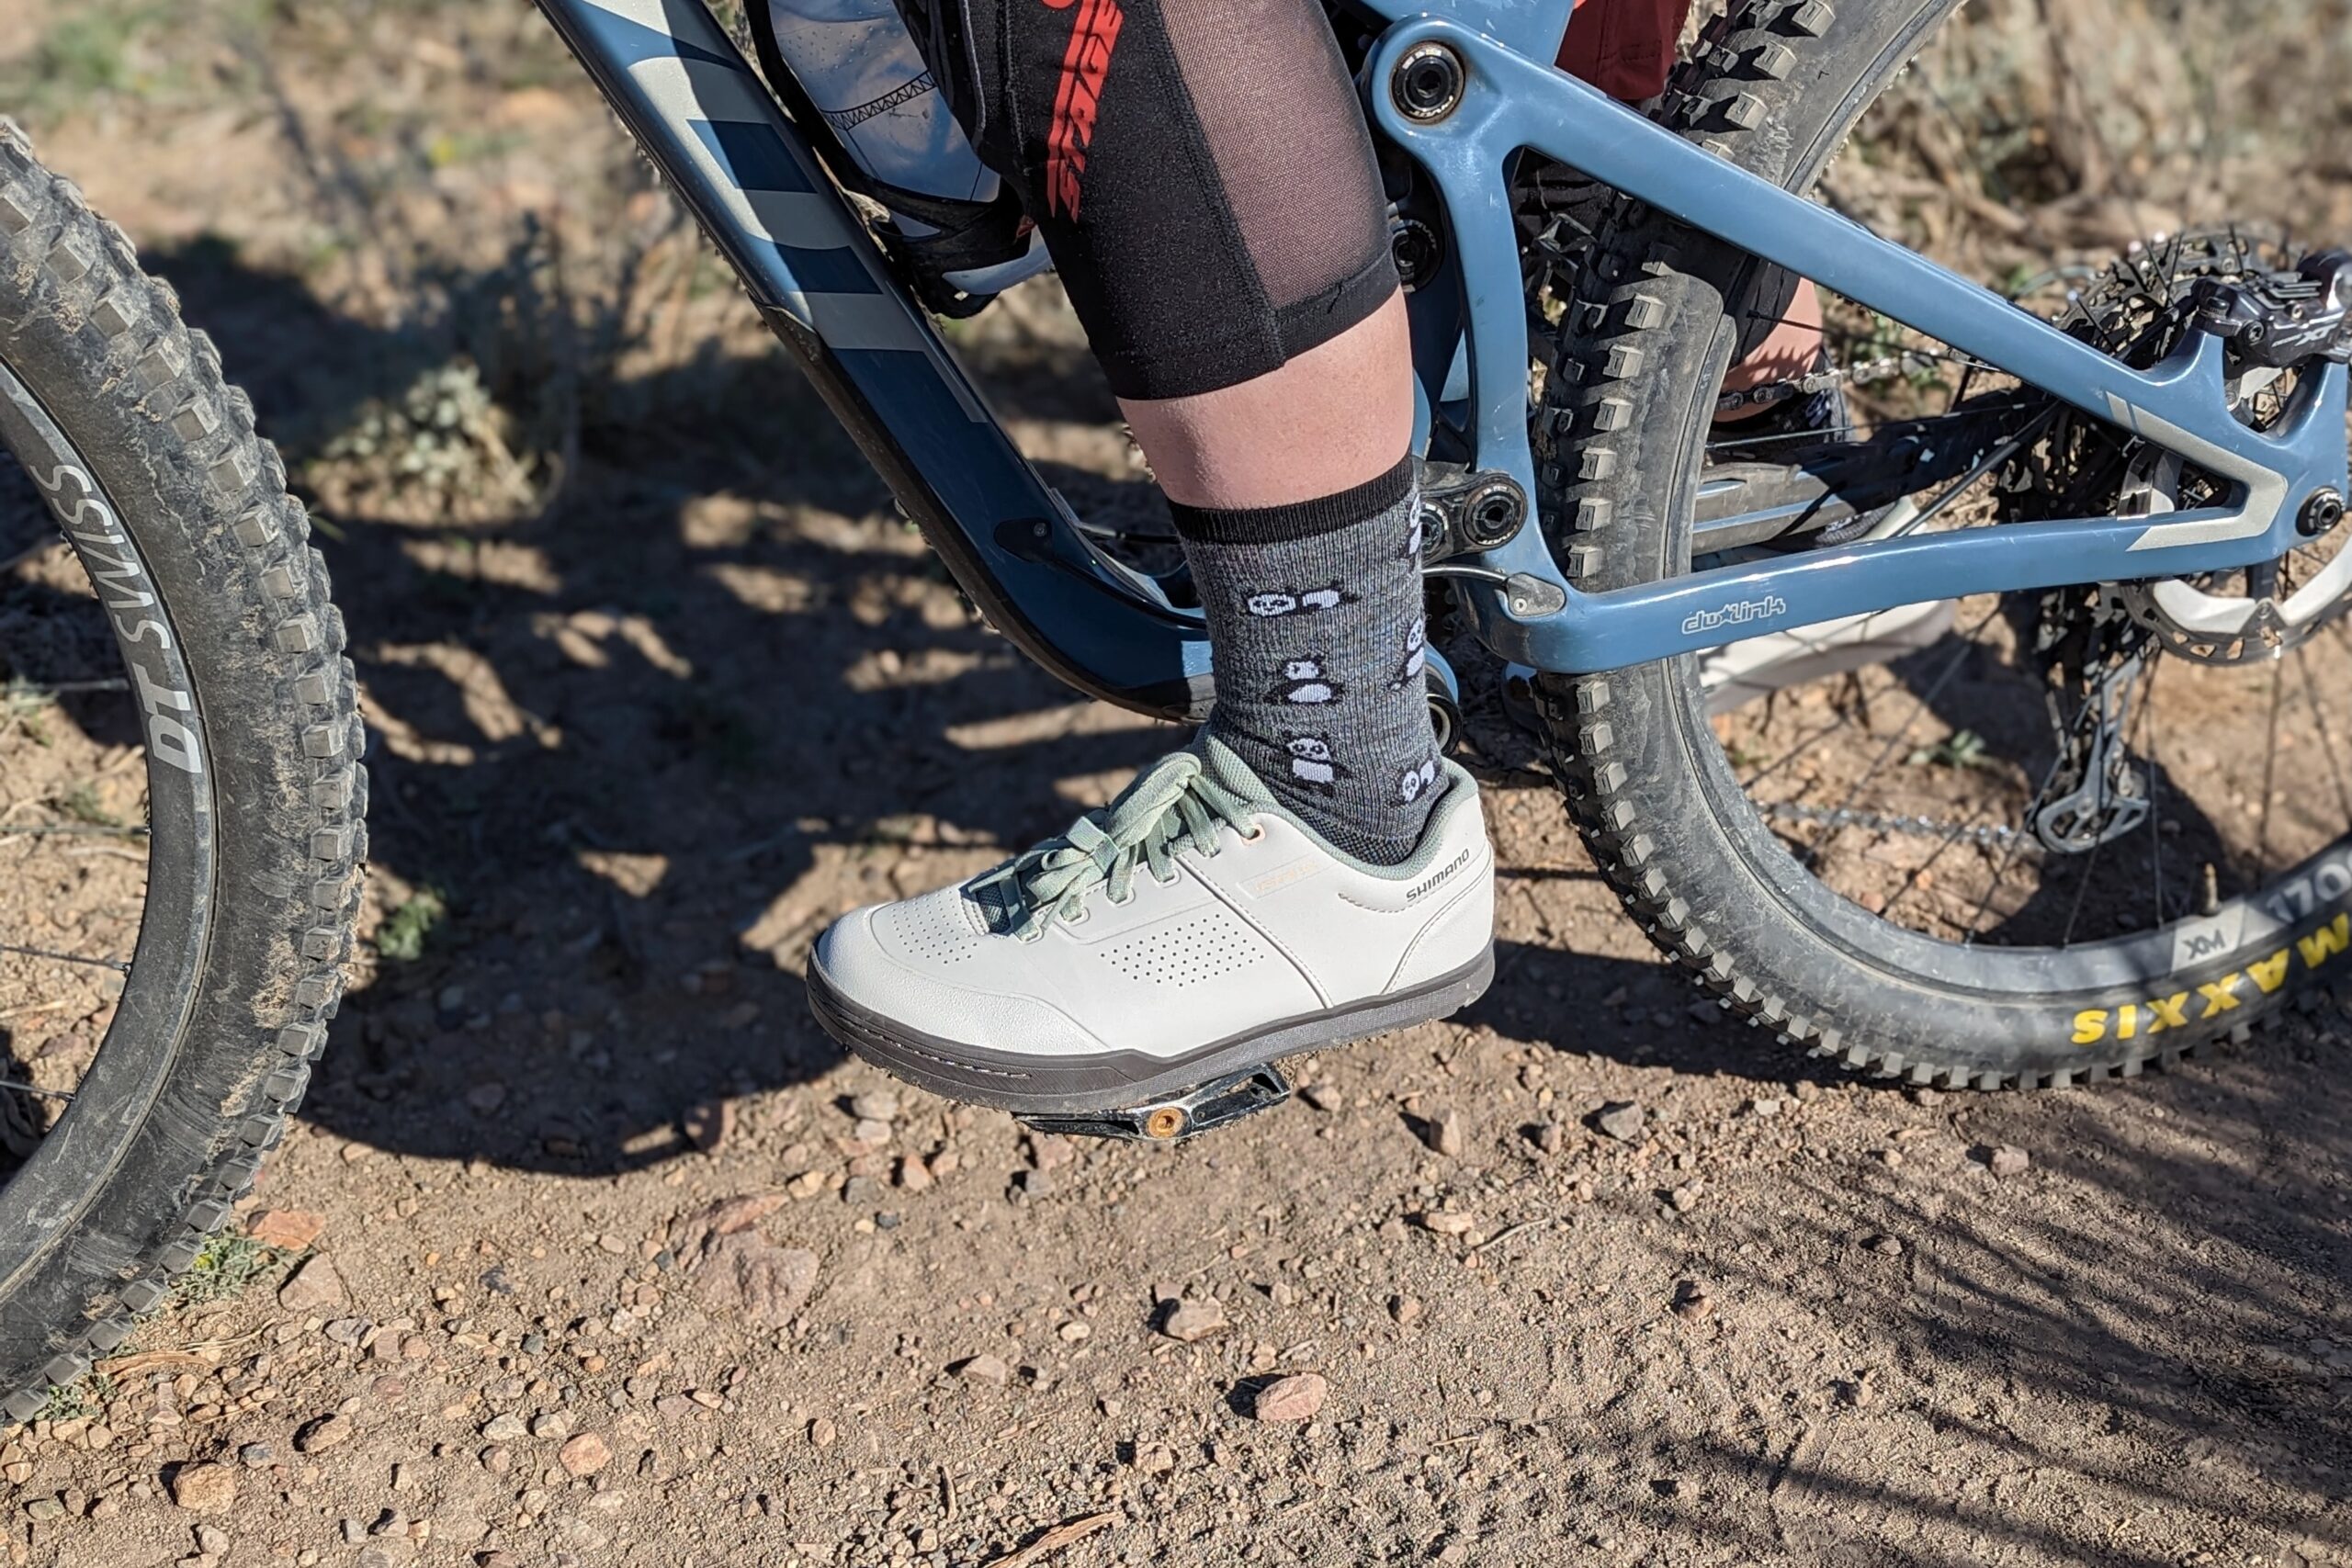 Using flat pedal shoes with flat pedals